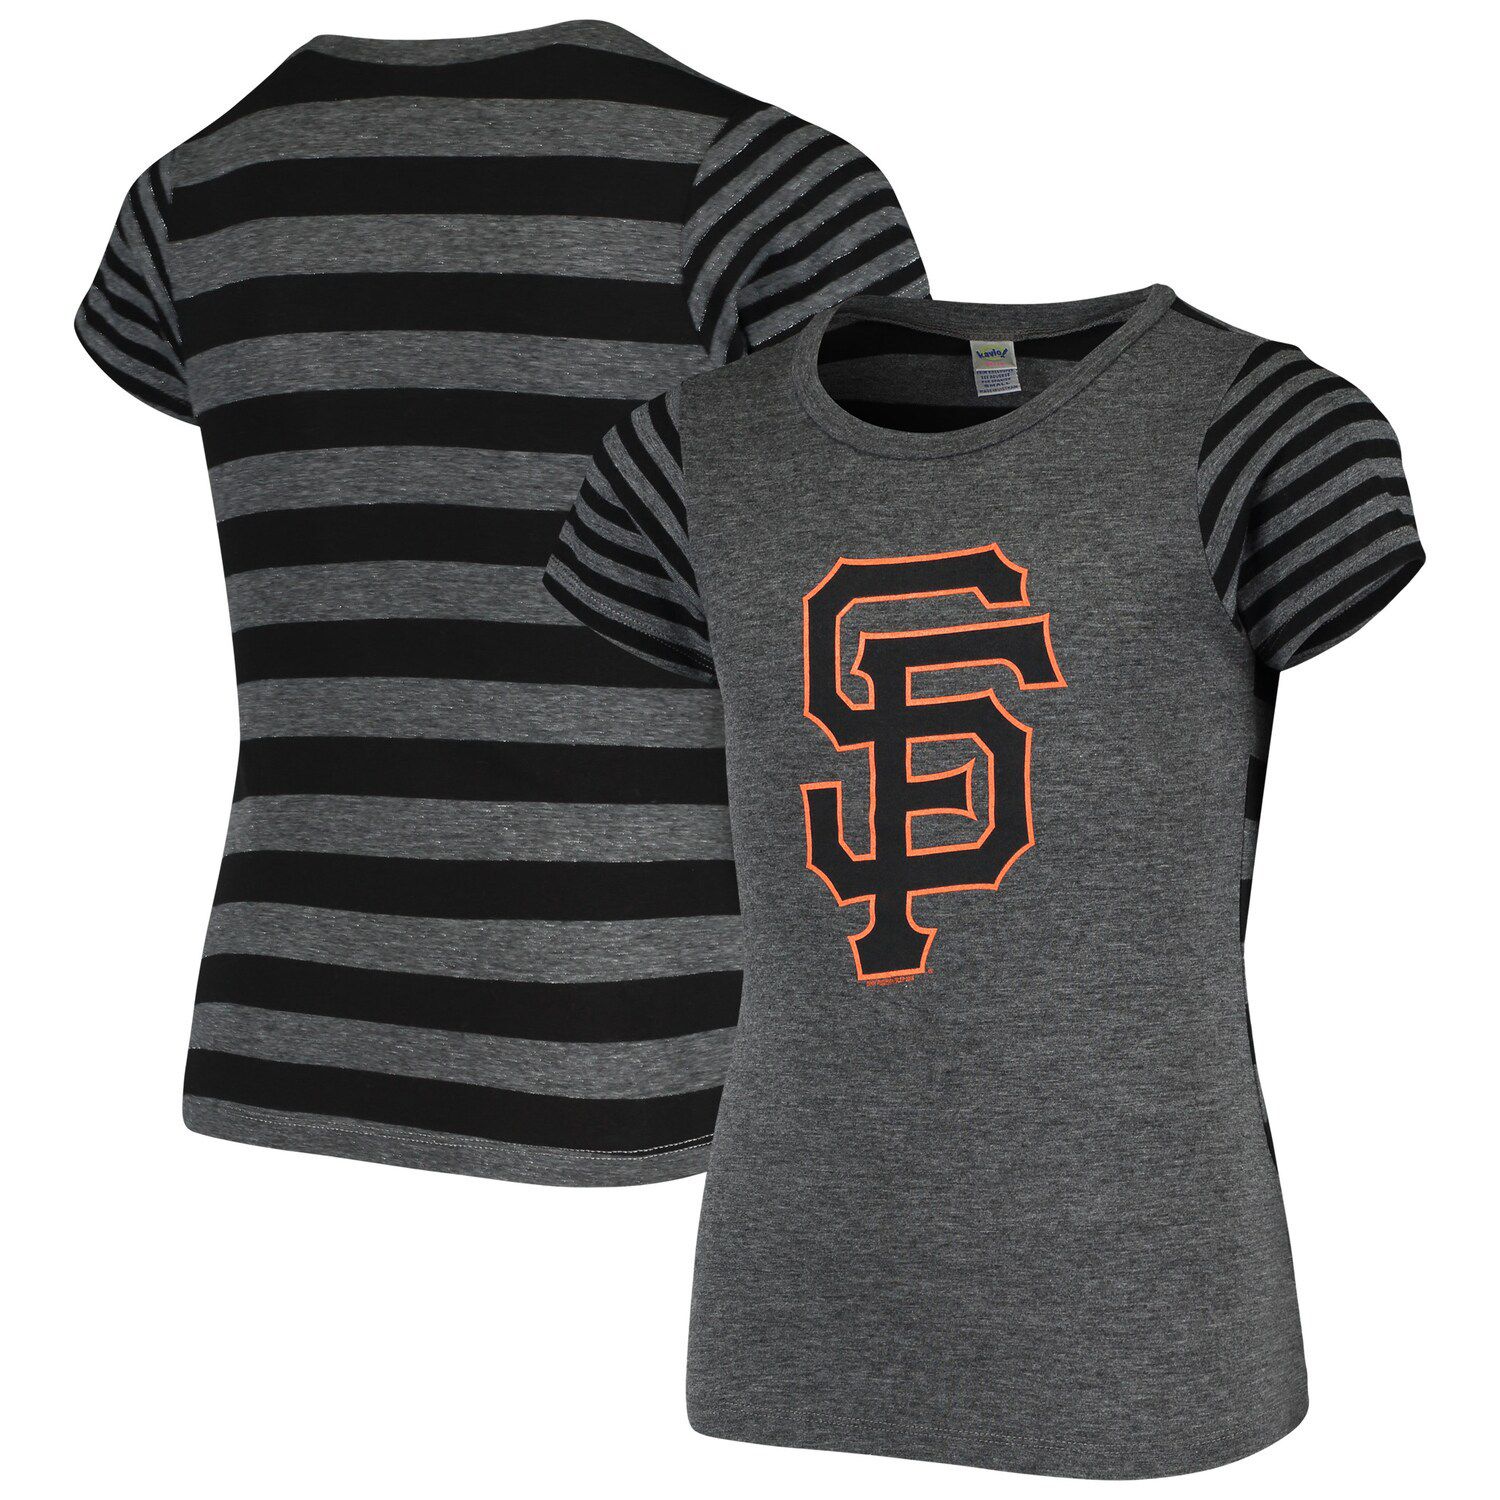 Image for Unbranded Youth Heathered Black San Francisco Giants Striped Logo T-Shirt at Kohl's.